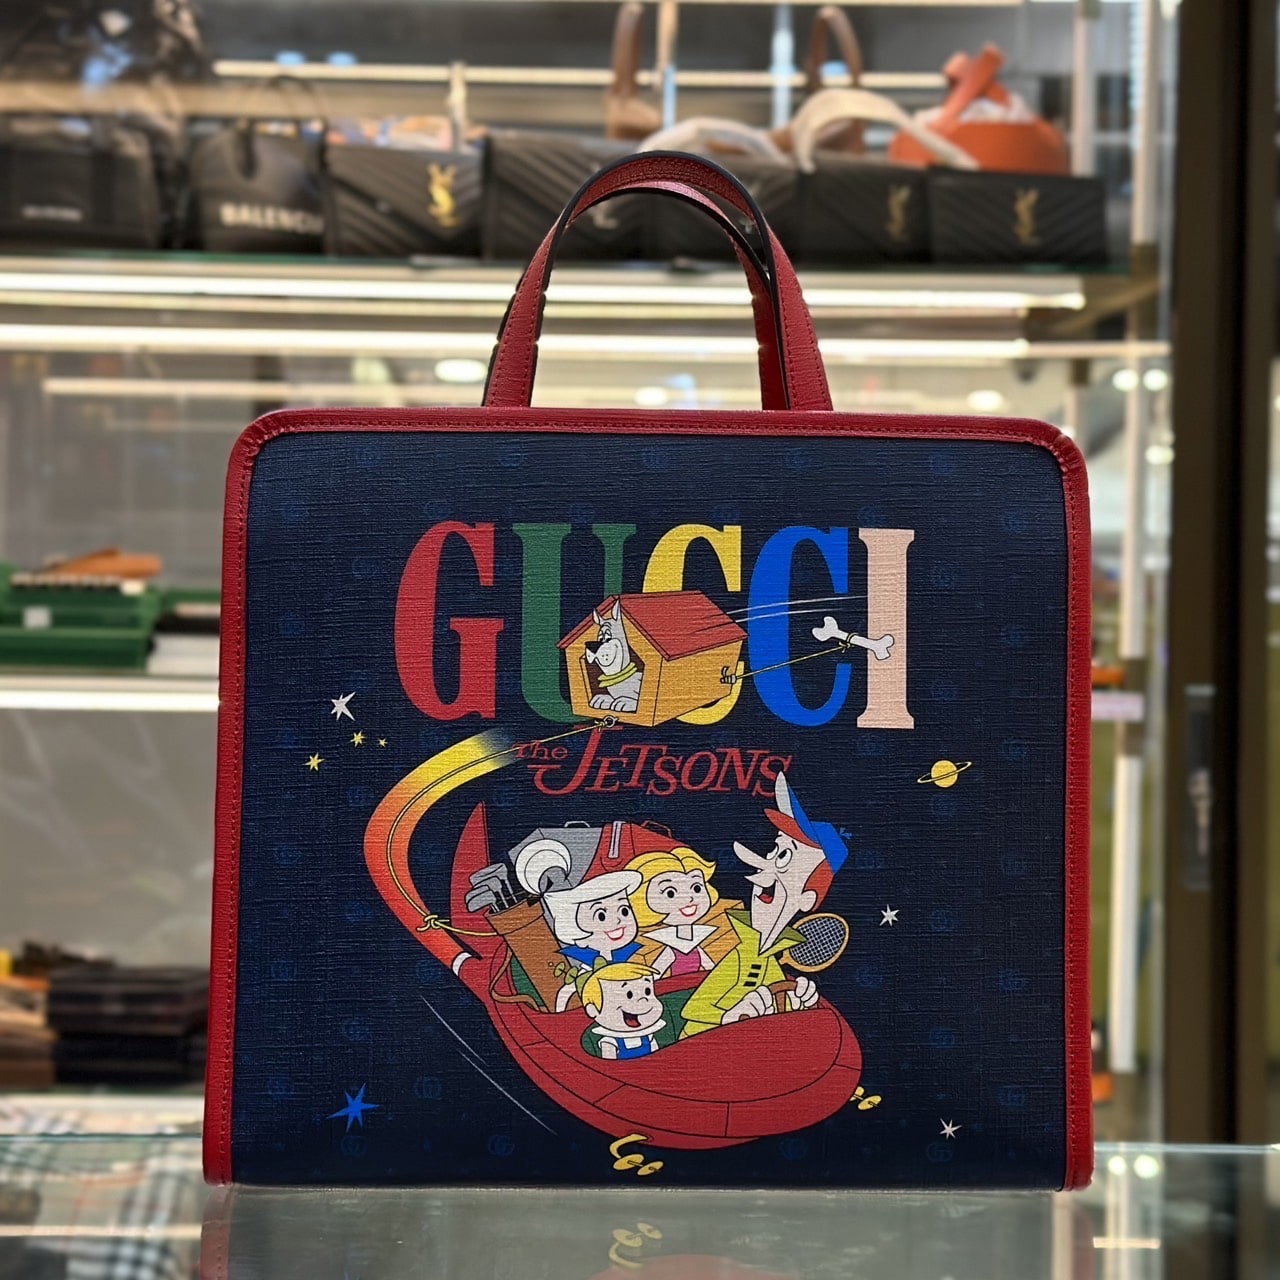 GUCCI: The Jetsons© x backpack in coated cotton with all-over